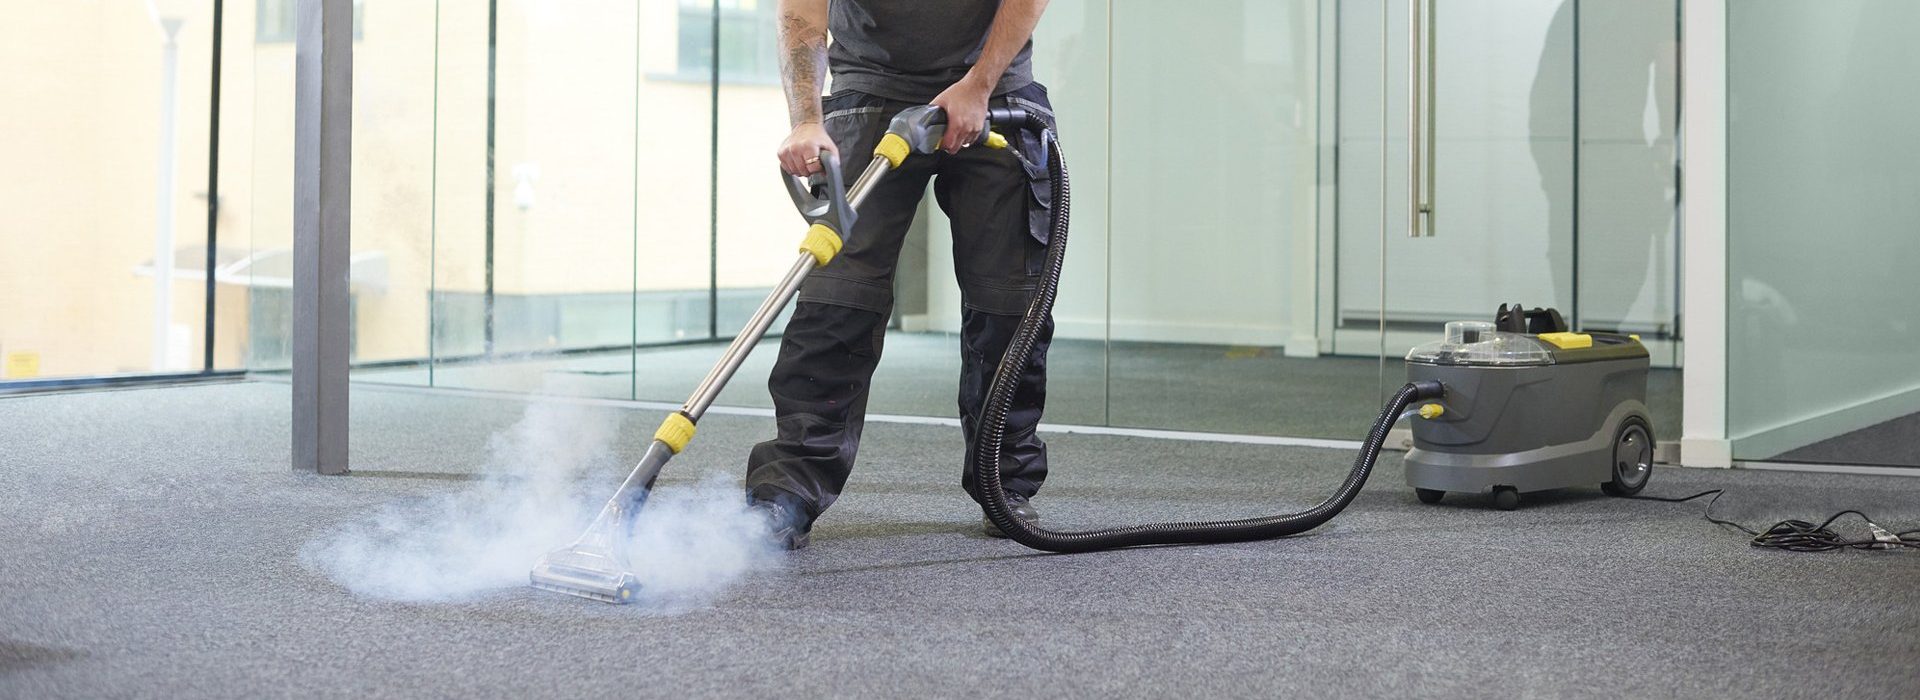 Our promise to you… To provide you with the most outstanding carpet steam cleaning experience you have ever had…Guaranteed!